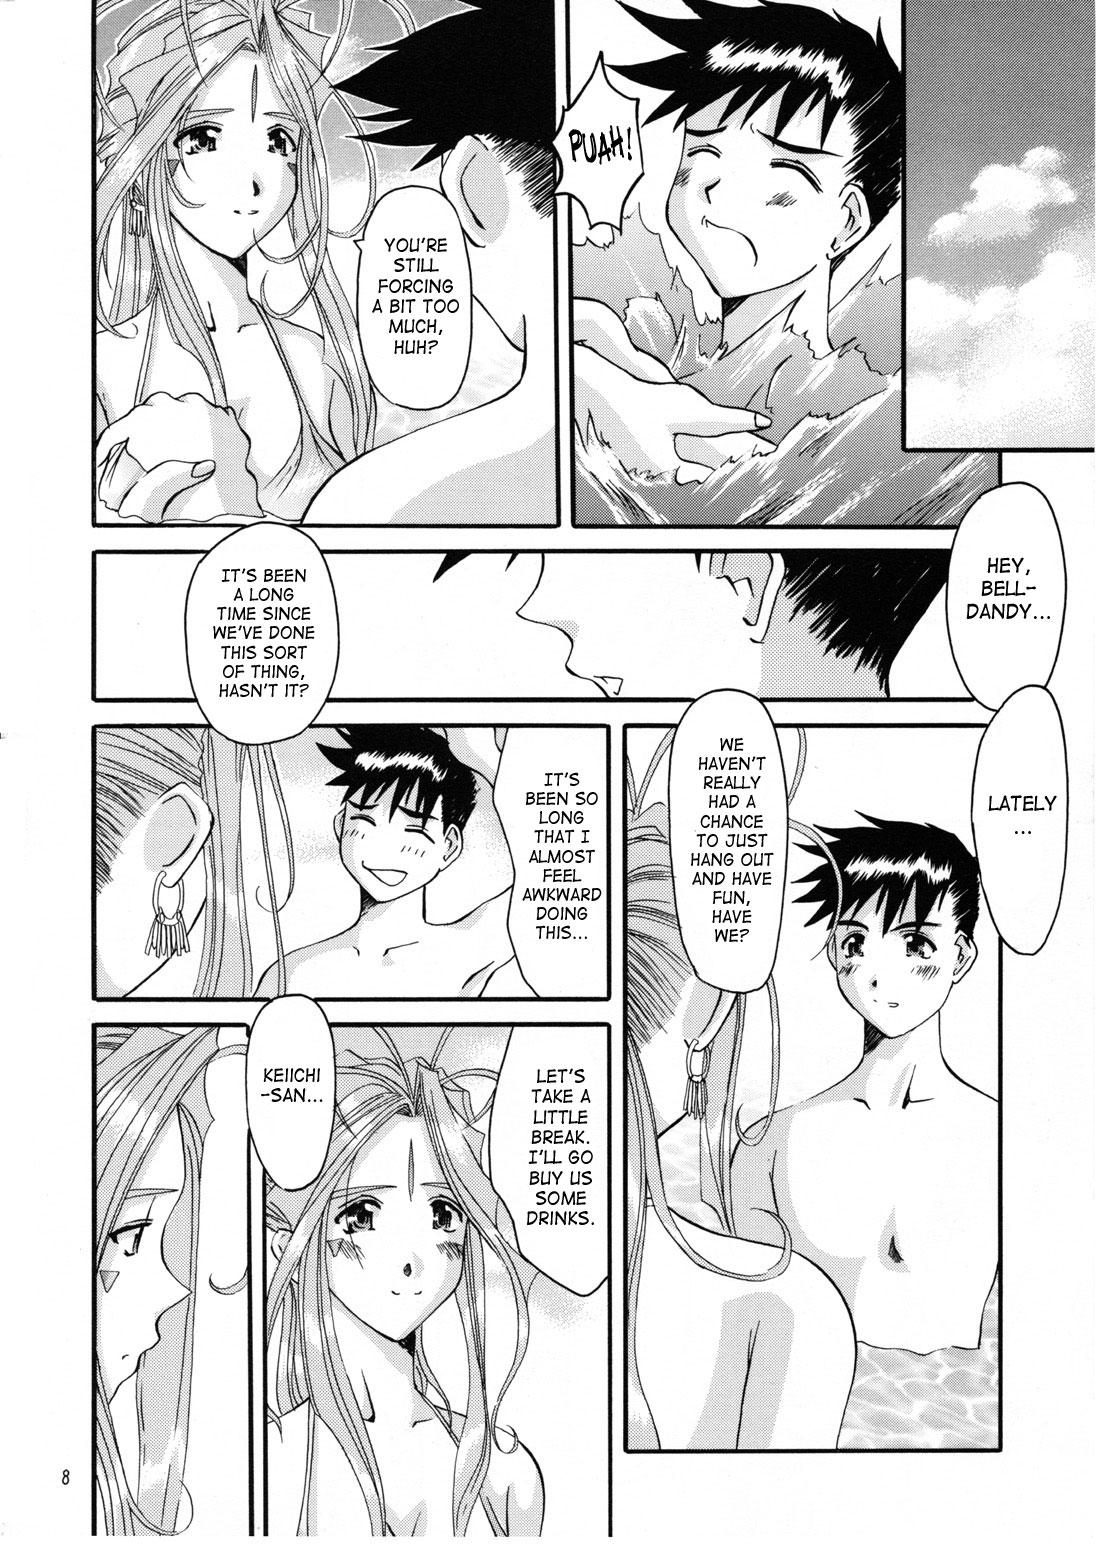 Spoon Nightmare of My Goddess Summer Interval - Ah my goddess 18 Year Old - Page 7